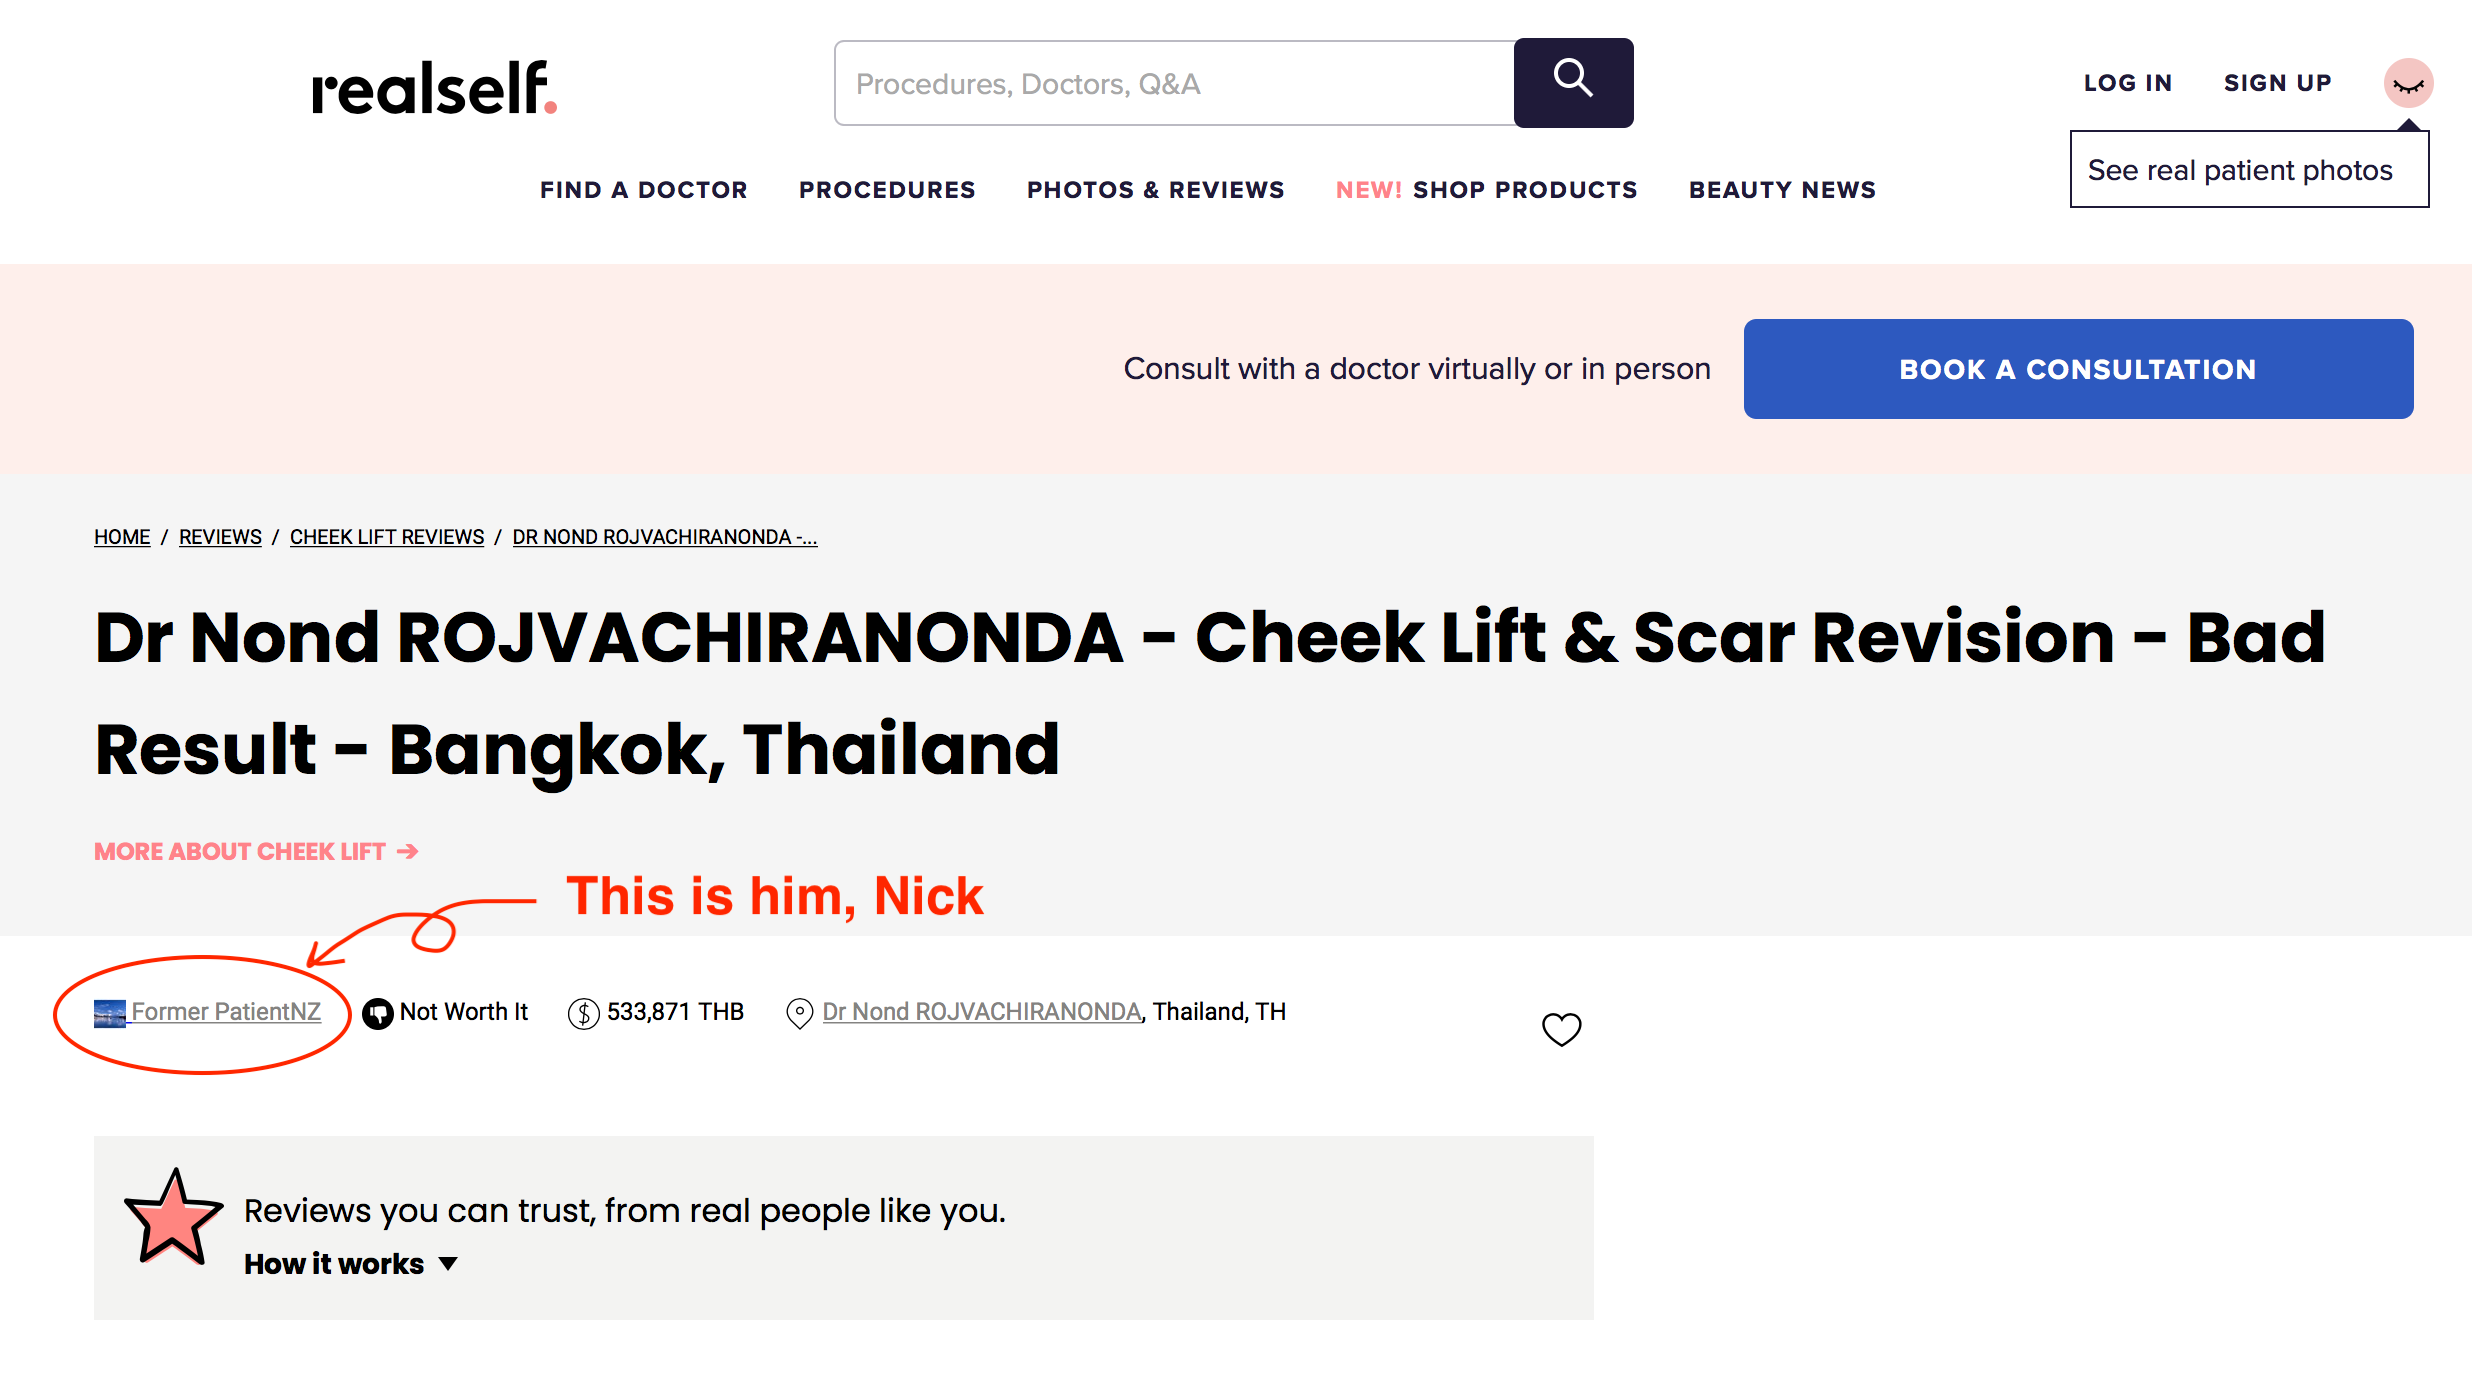 Mr. Nick posted lying messages on Realself.com.